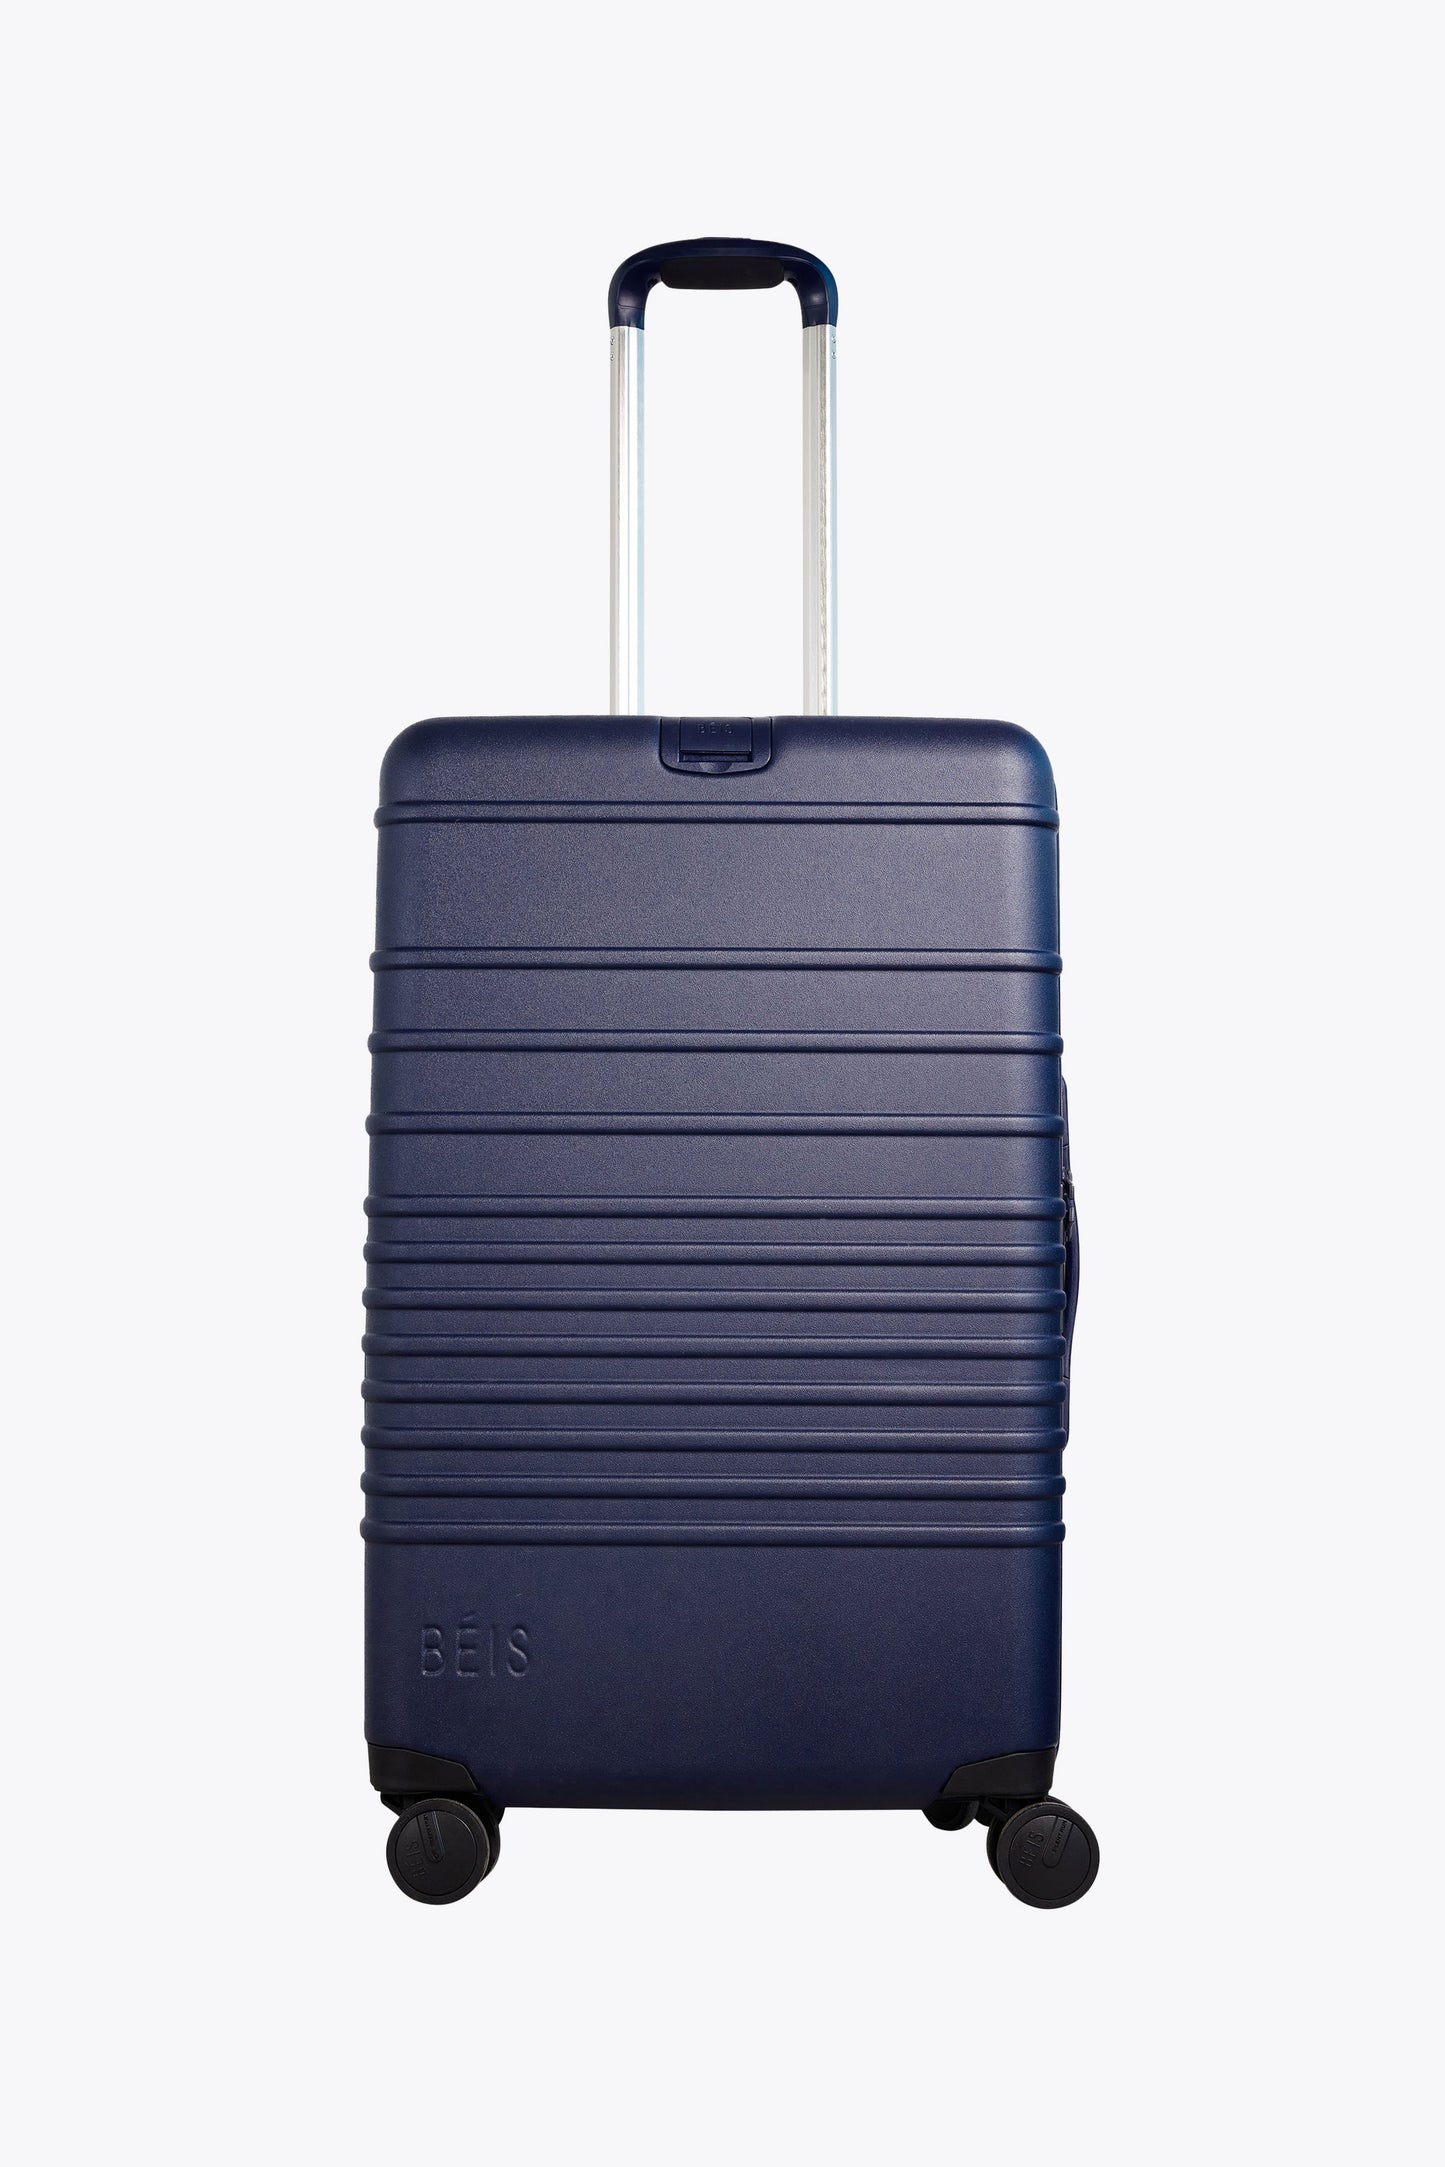 The 26" Check-In Roller in Navy